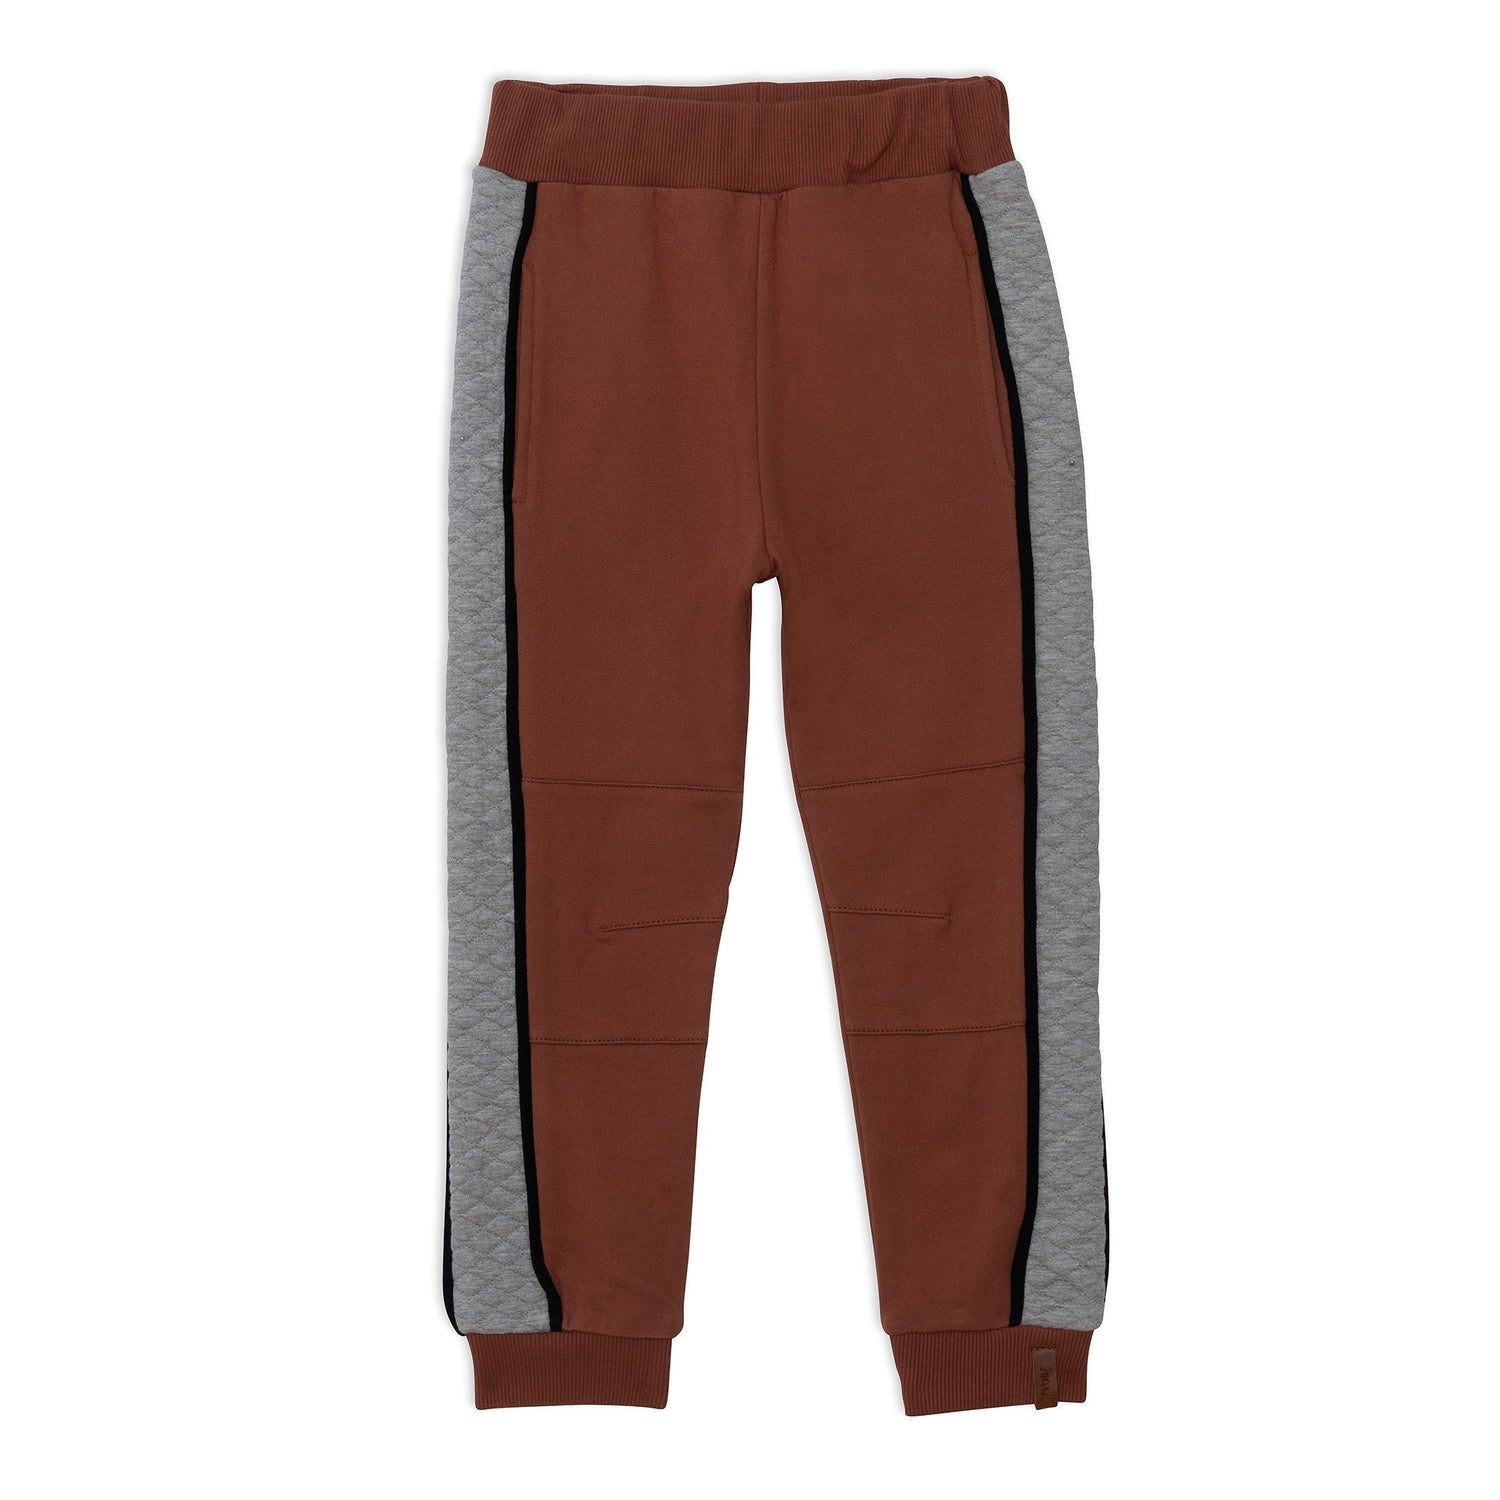 Fleece Sweatpants With Quilting Brown, Grey And Black E20U21_951